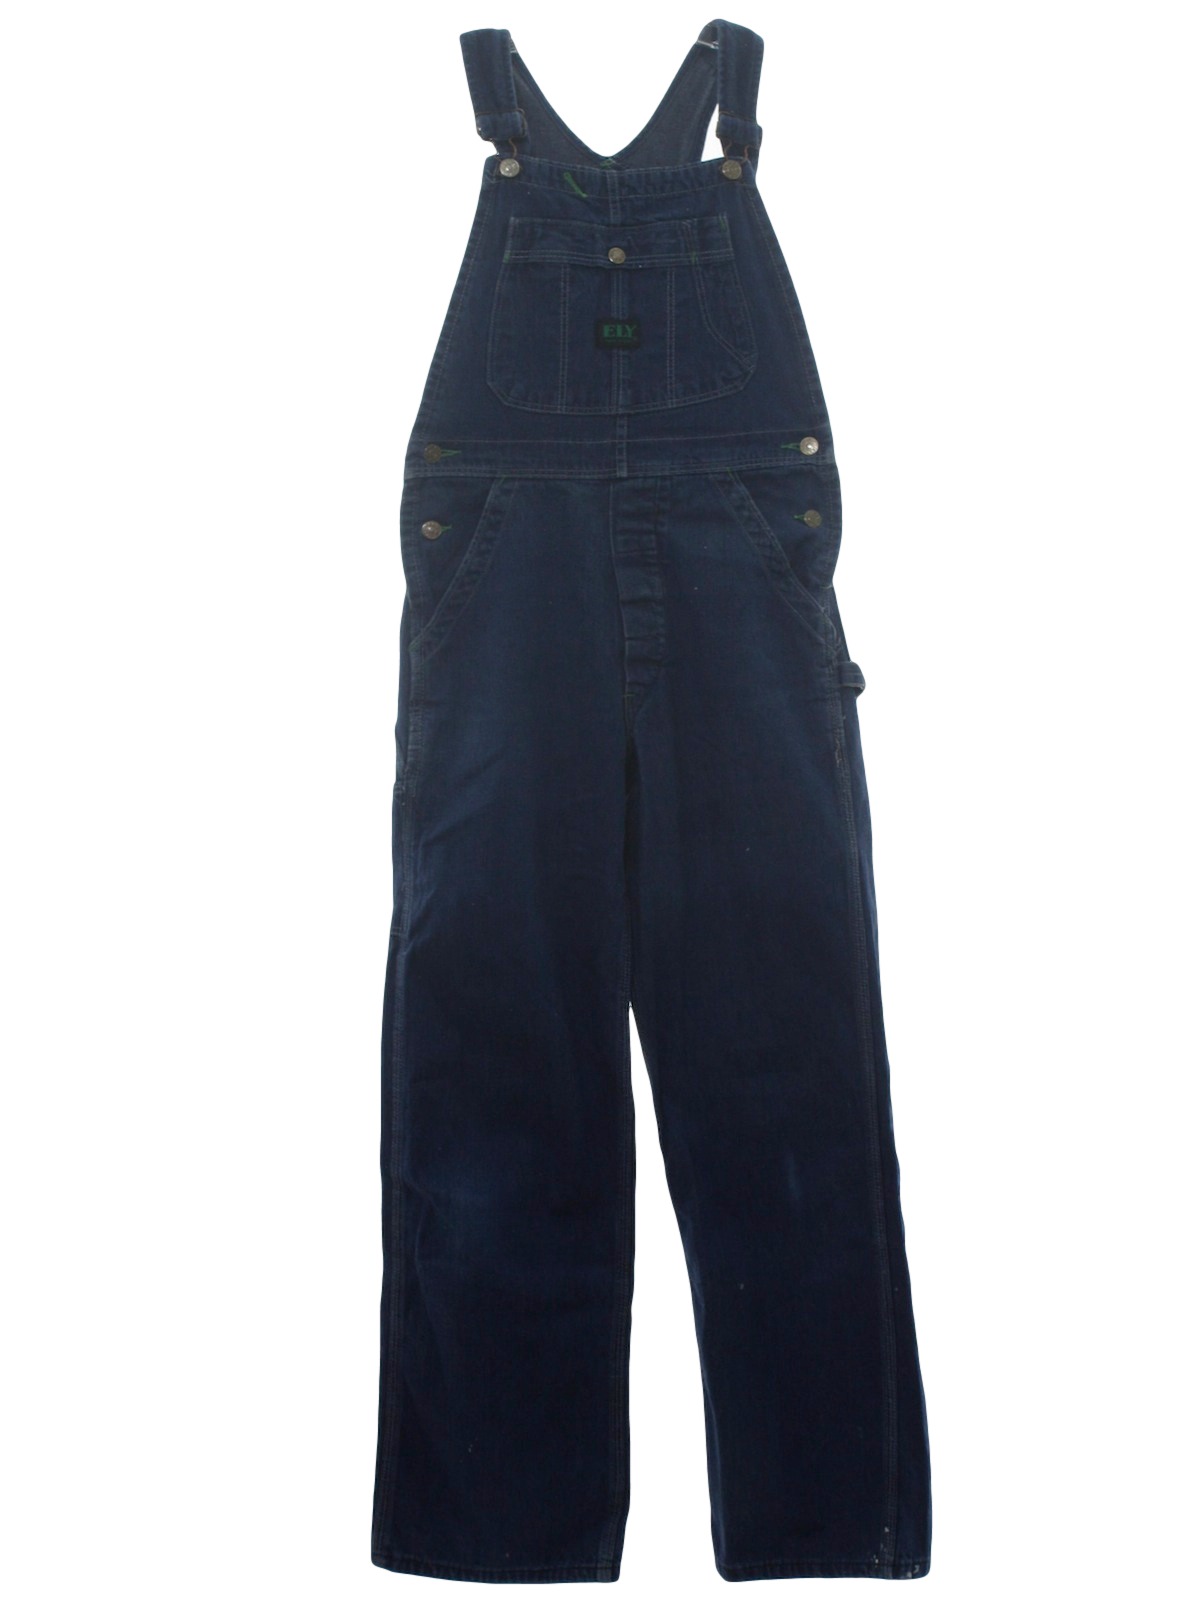 1990's Overalls (Ely): 90s -Ely- poly cotton mens dark blue denim overalls